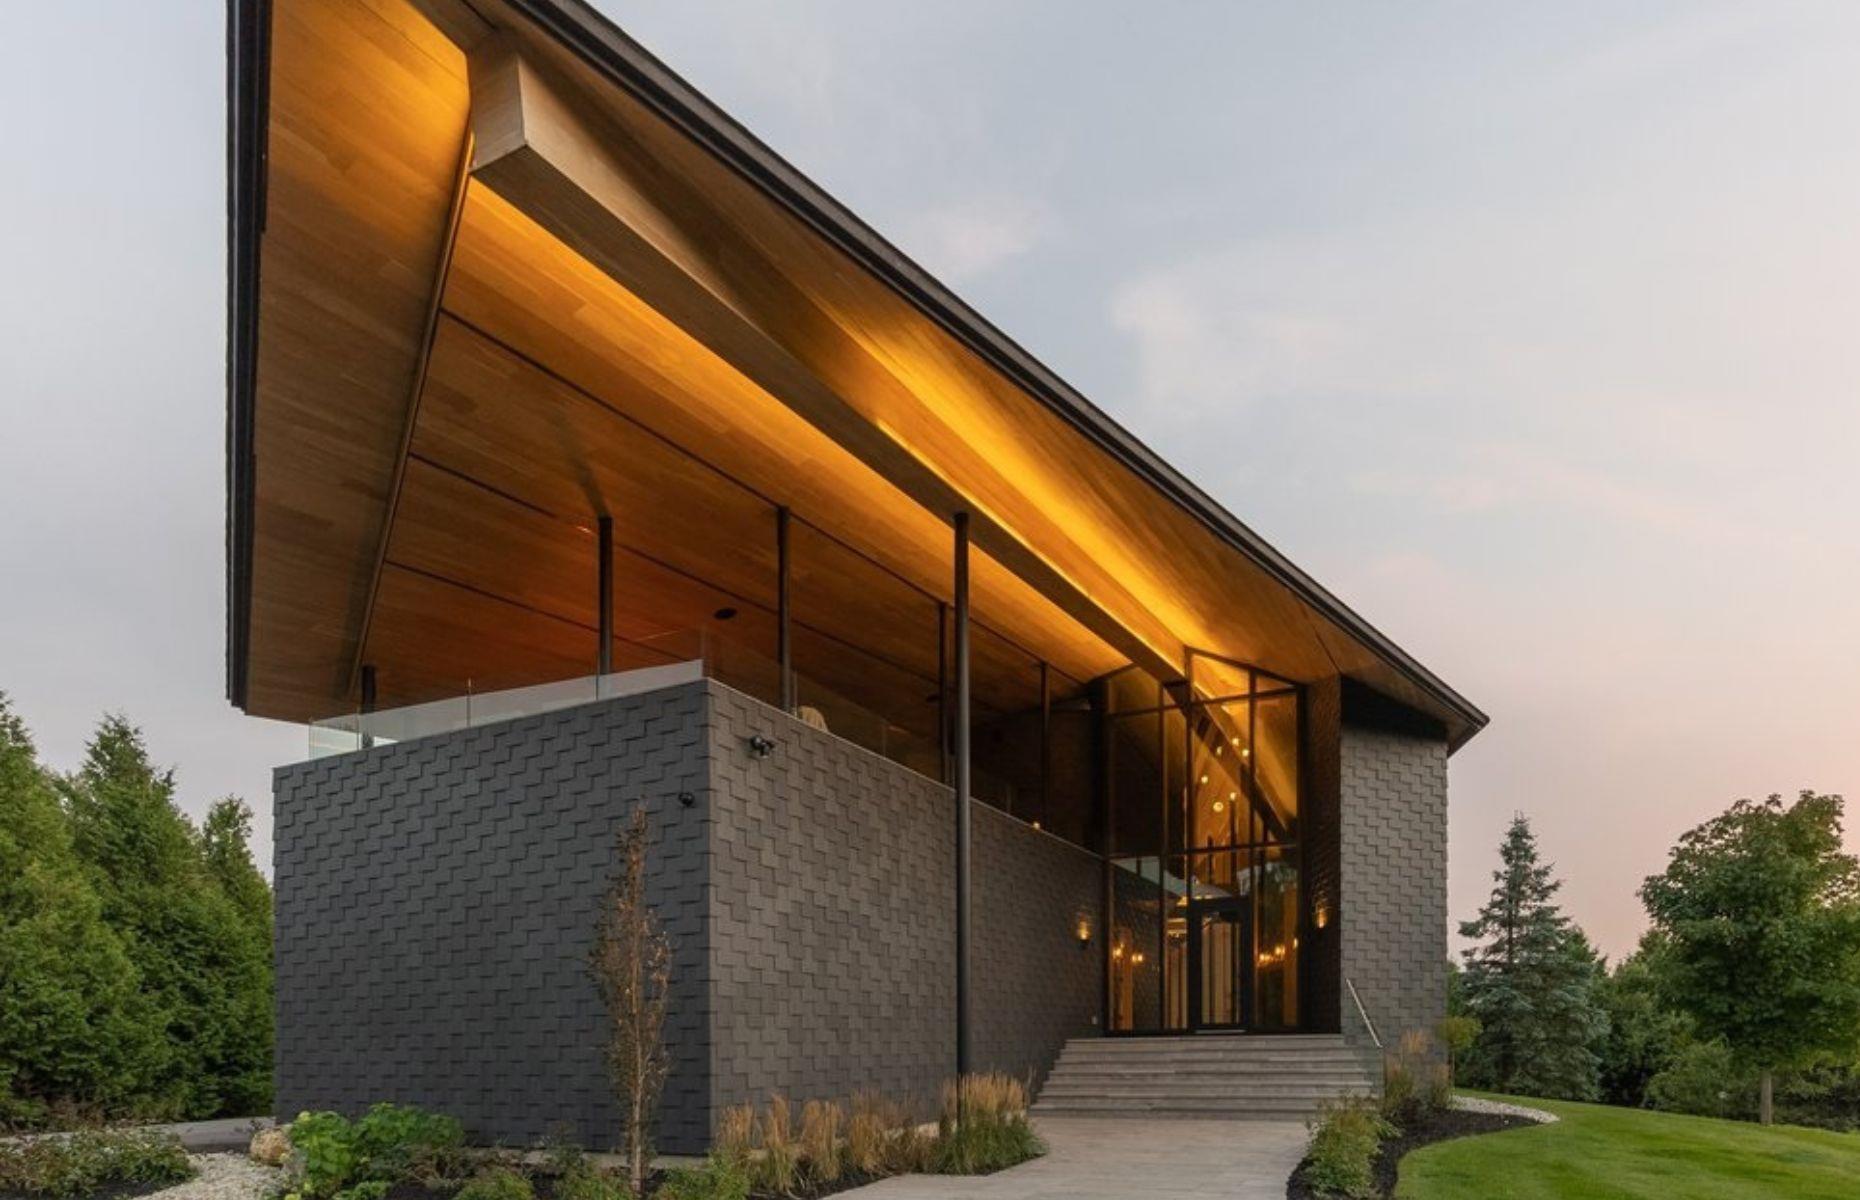 <p>When it comes to wow-factor design, Ipeak House stands head and shoulders above most. Located in the Ontario town of Caledon, this <a href="https://www.loveproperty.com/gallerylist/84607/canadas-most-amazing-mansions-for-sale">show-stopping Canadian home</a> offers style, space, scenery and seclusion in one. </p>